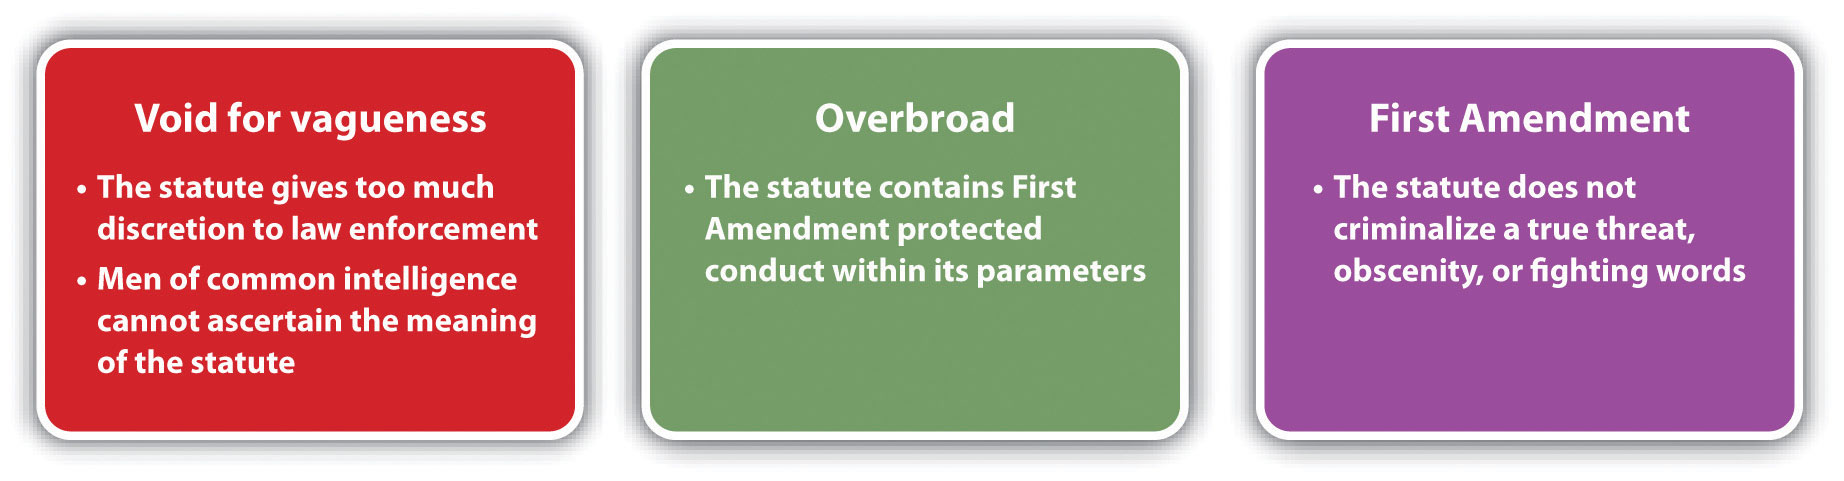 Diagram of Potential Constitutional Challenges to Disorderly Conduct Statutes, including void for vagueness, being overbroad, and the First Amendment.